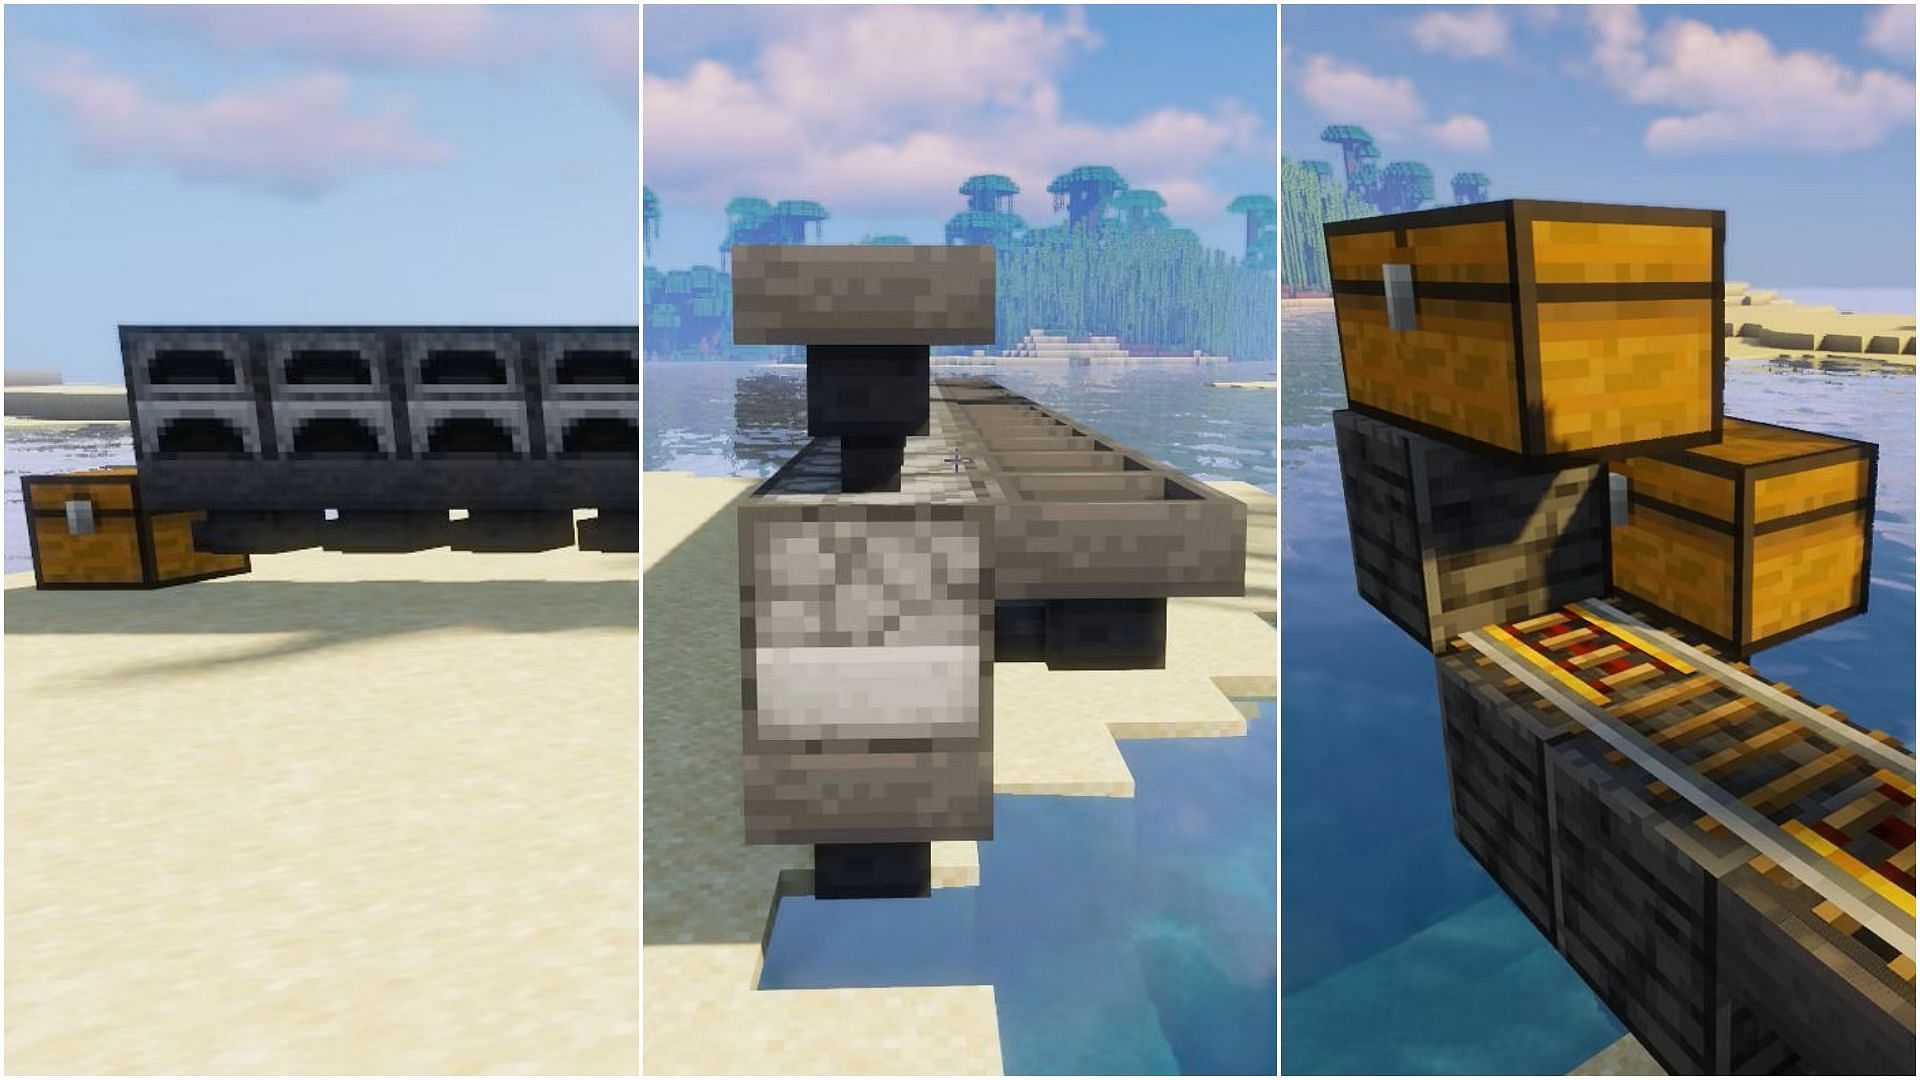 Build the furnace, hopper, and storage system for the super smelter in Minecraft (Image via Sportskeeda)